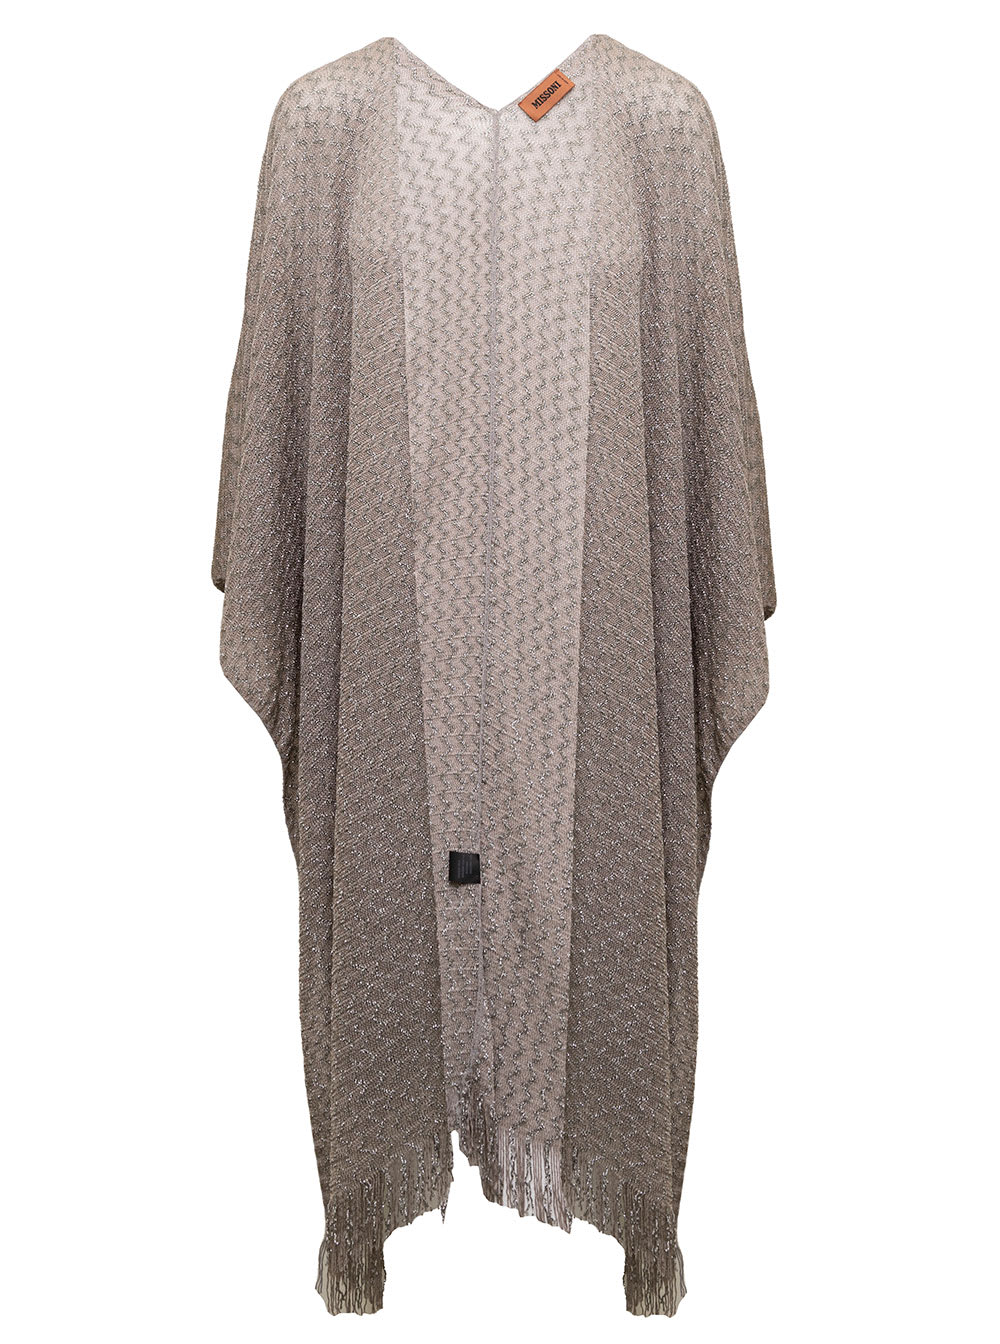 M Missoni Grey Cape With Signature Zig Zag And Fringes Woman Mssoni